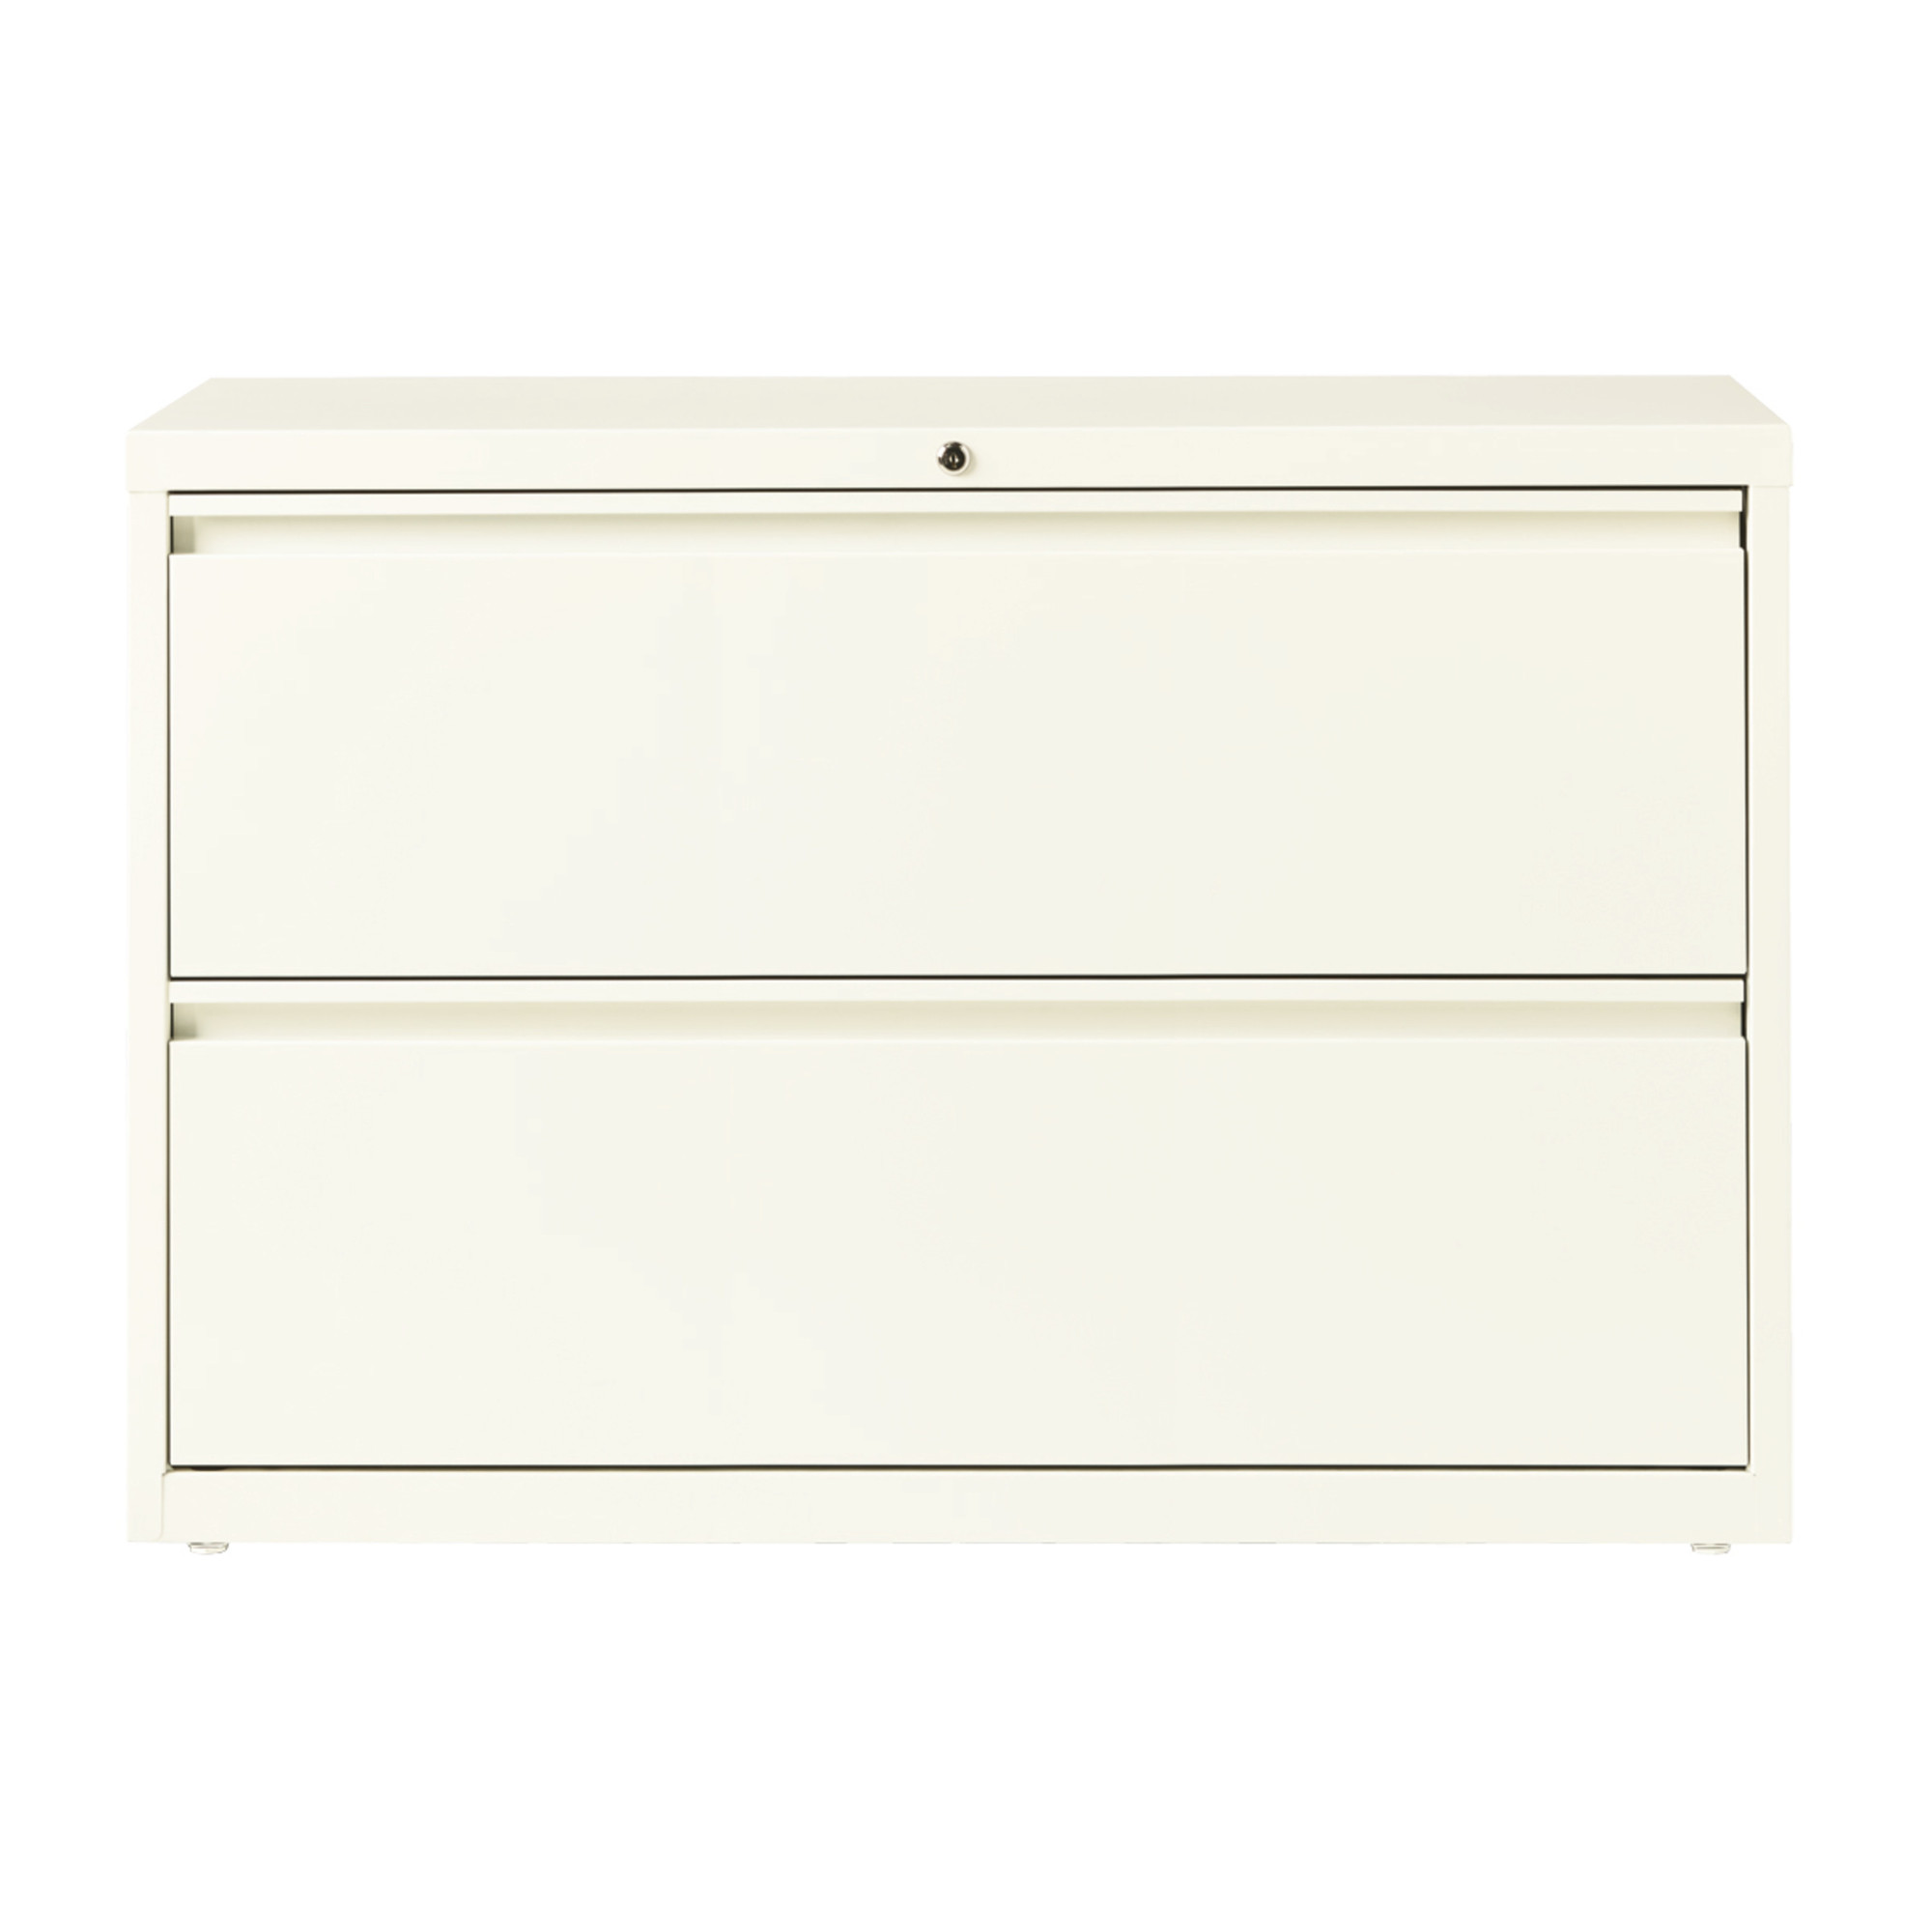 2 Drawer Lateral File Cabinet, Width 42 in, Depth 18.625 in, Height 28 in, Model - Hirsh Industries 20662